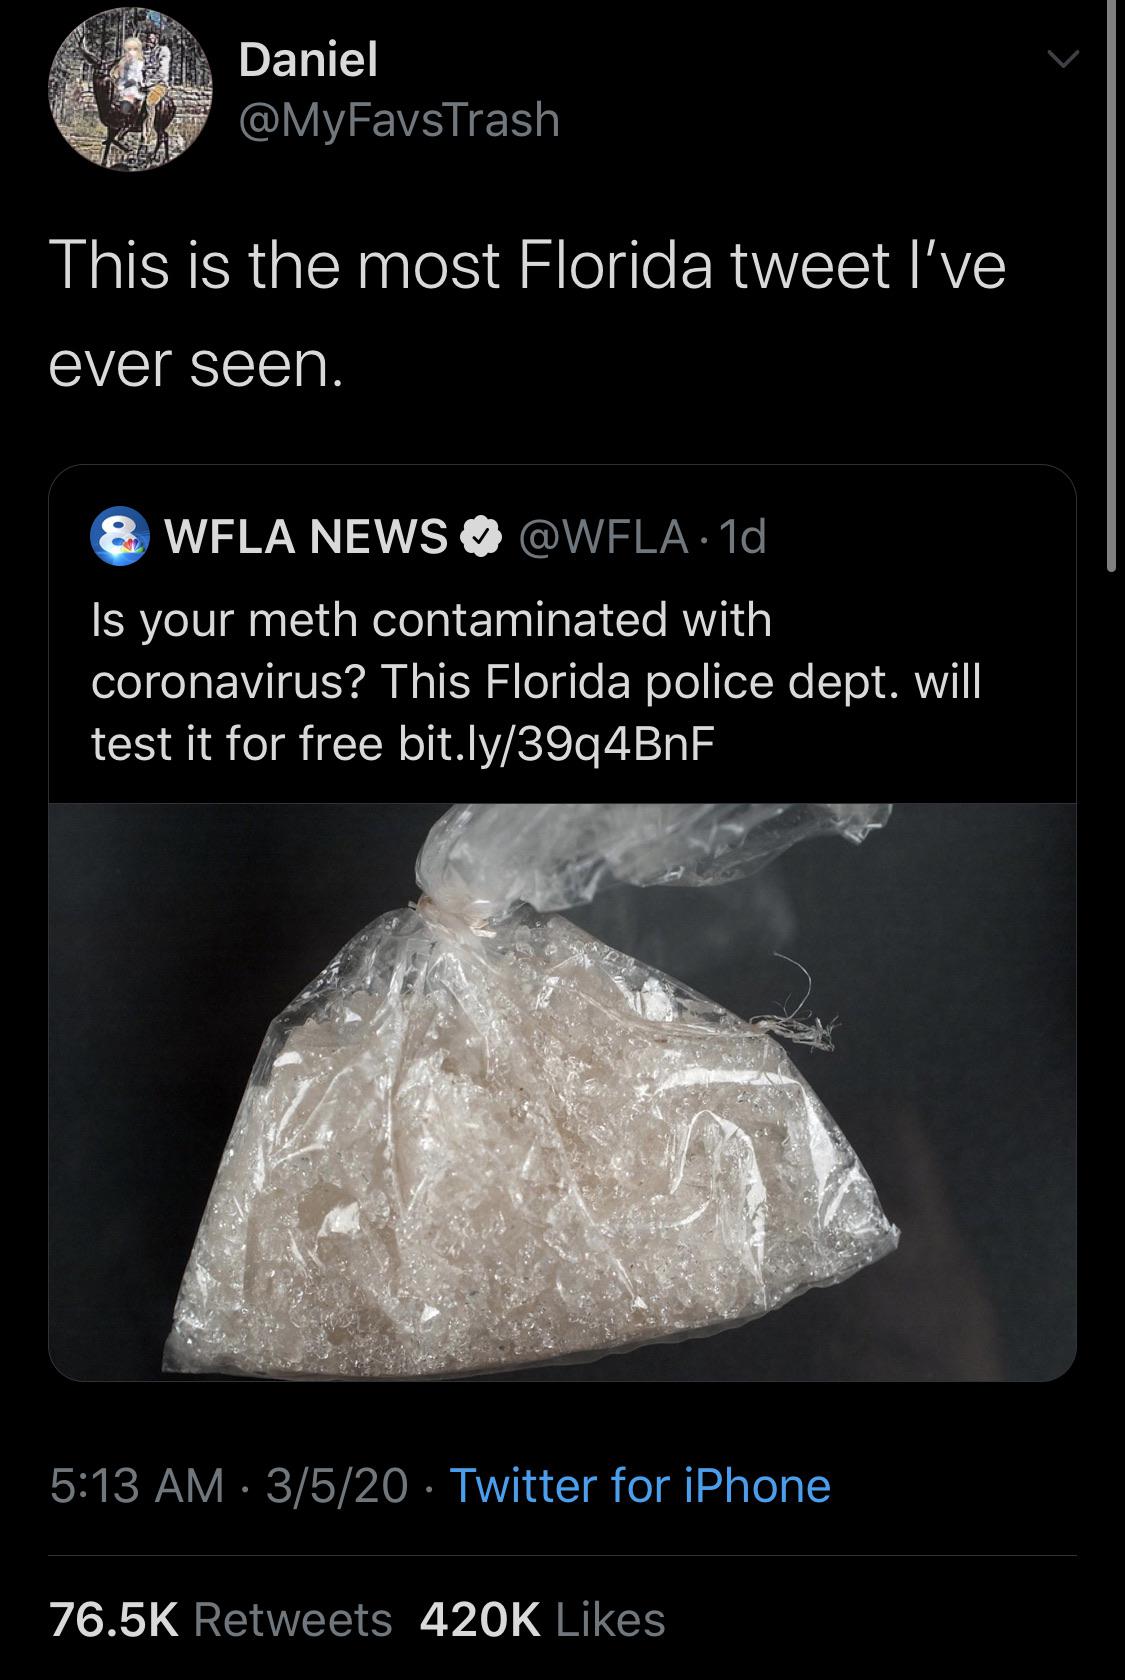 drugs meth - Daniel This is the most Florida tweet l've ever seen. & Wfla News 1d 'Is your meth contaminated with coronavirus? This Florida police dept. will test it for free bit.ly39q4BnF. 3520 Twitter for iPhone